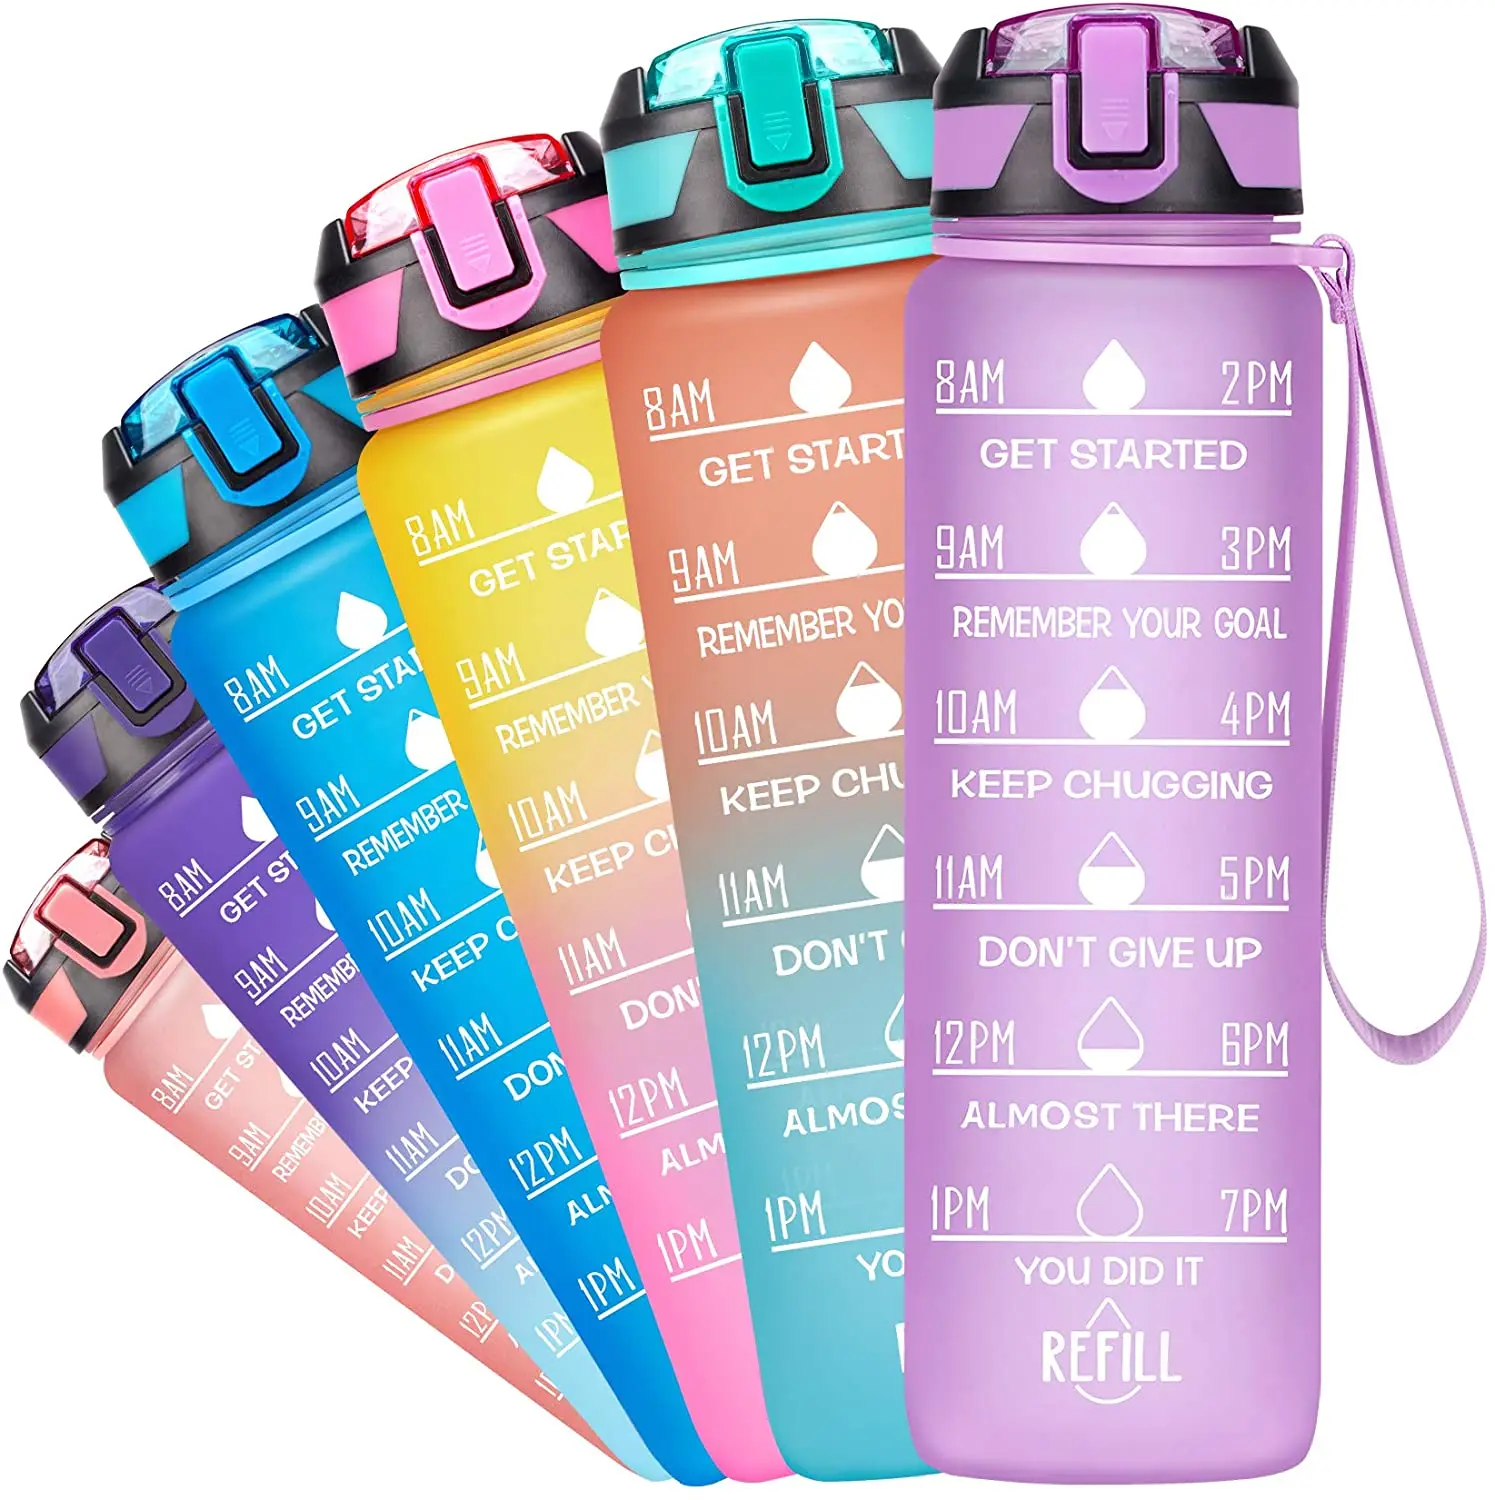 

32oz water bottle comes with an incentive time mark to ensure you drink plenty of water each day for workouts, gyms and outdoor, Customized color